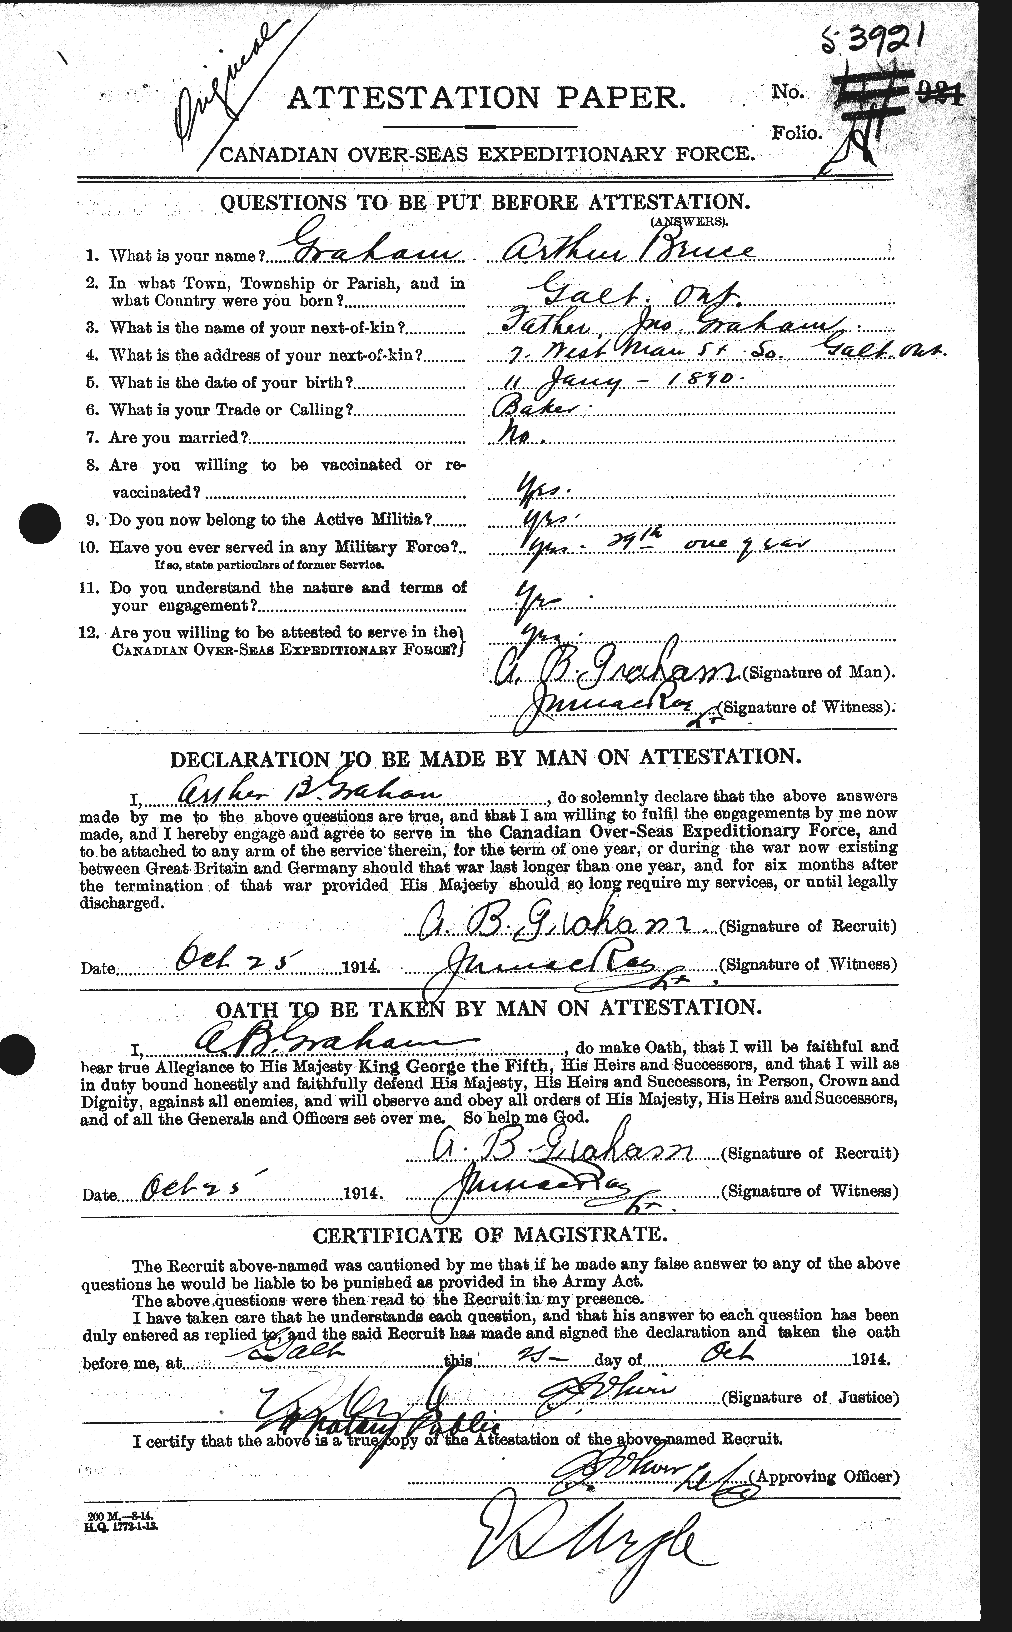 Personnel Records of the First World War - CEF 359653a